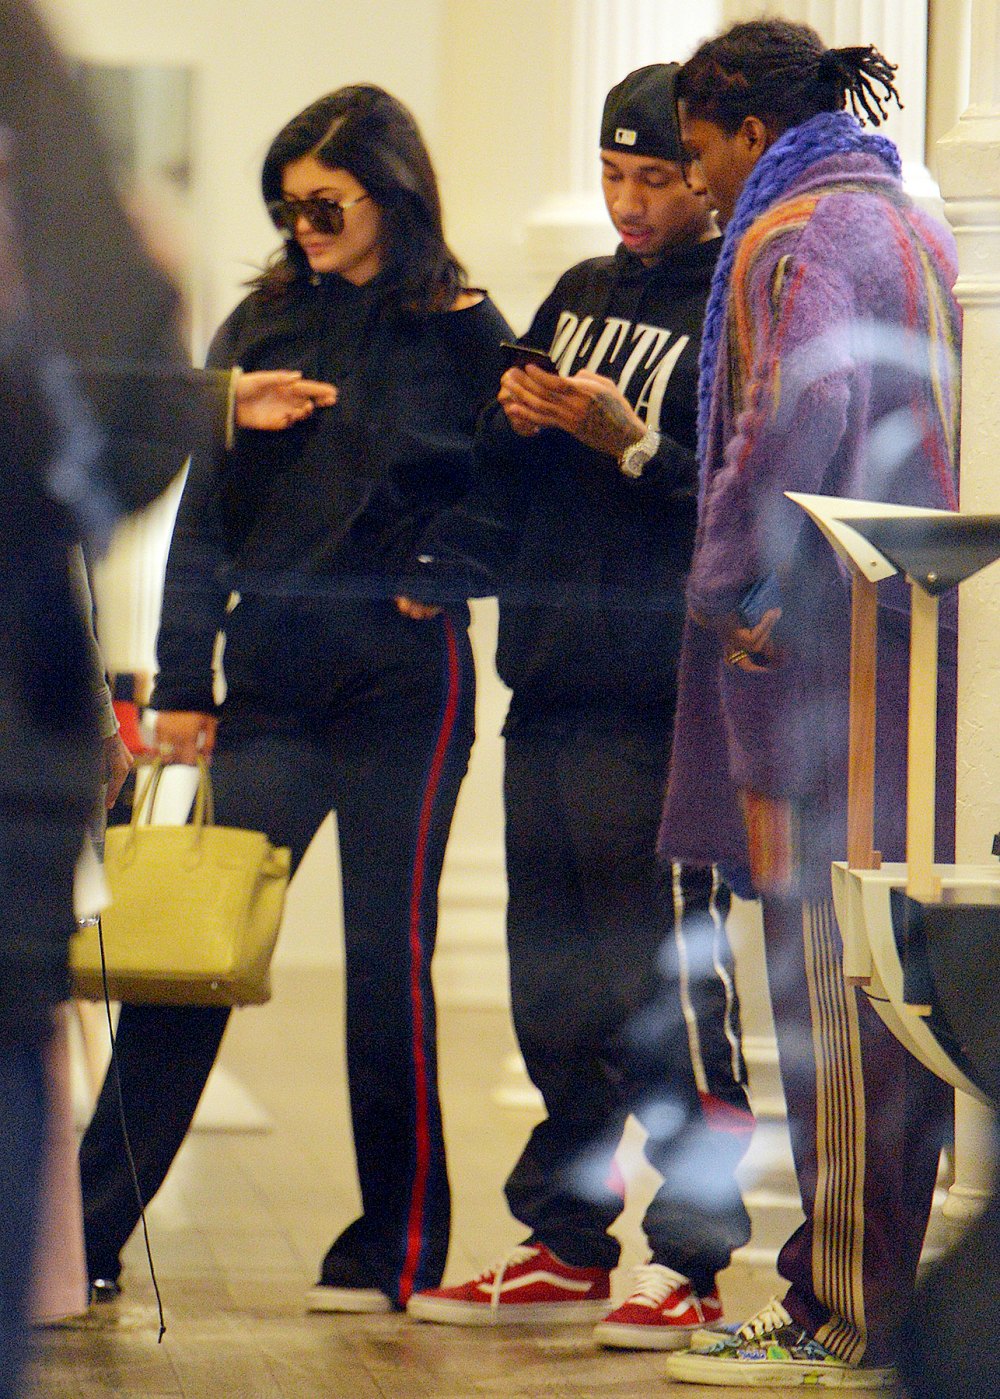 Kylie Jenner, Tyga, and A$AP Rocky (from left) are seen shopping in Manhattan on January 17, 2017 in New York City.